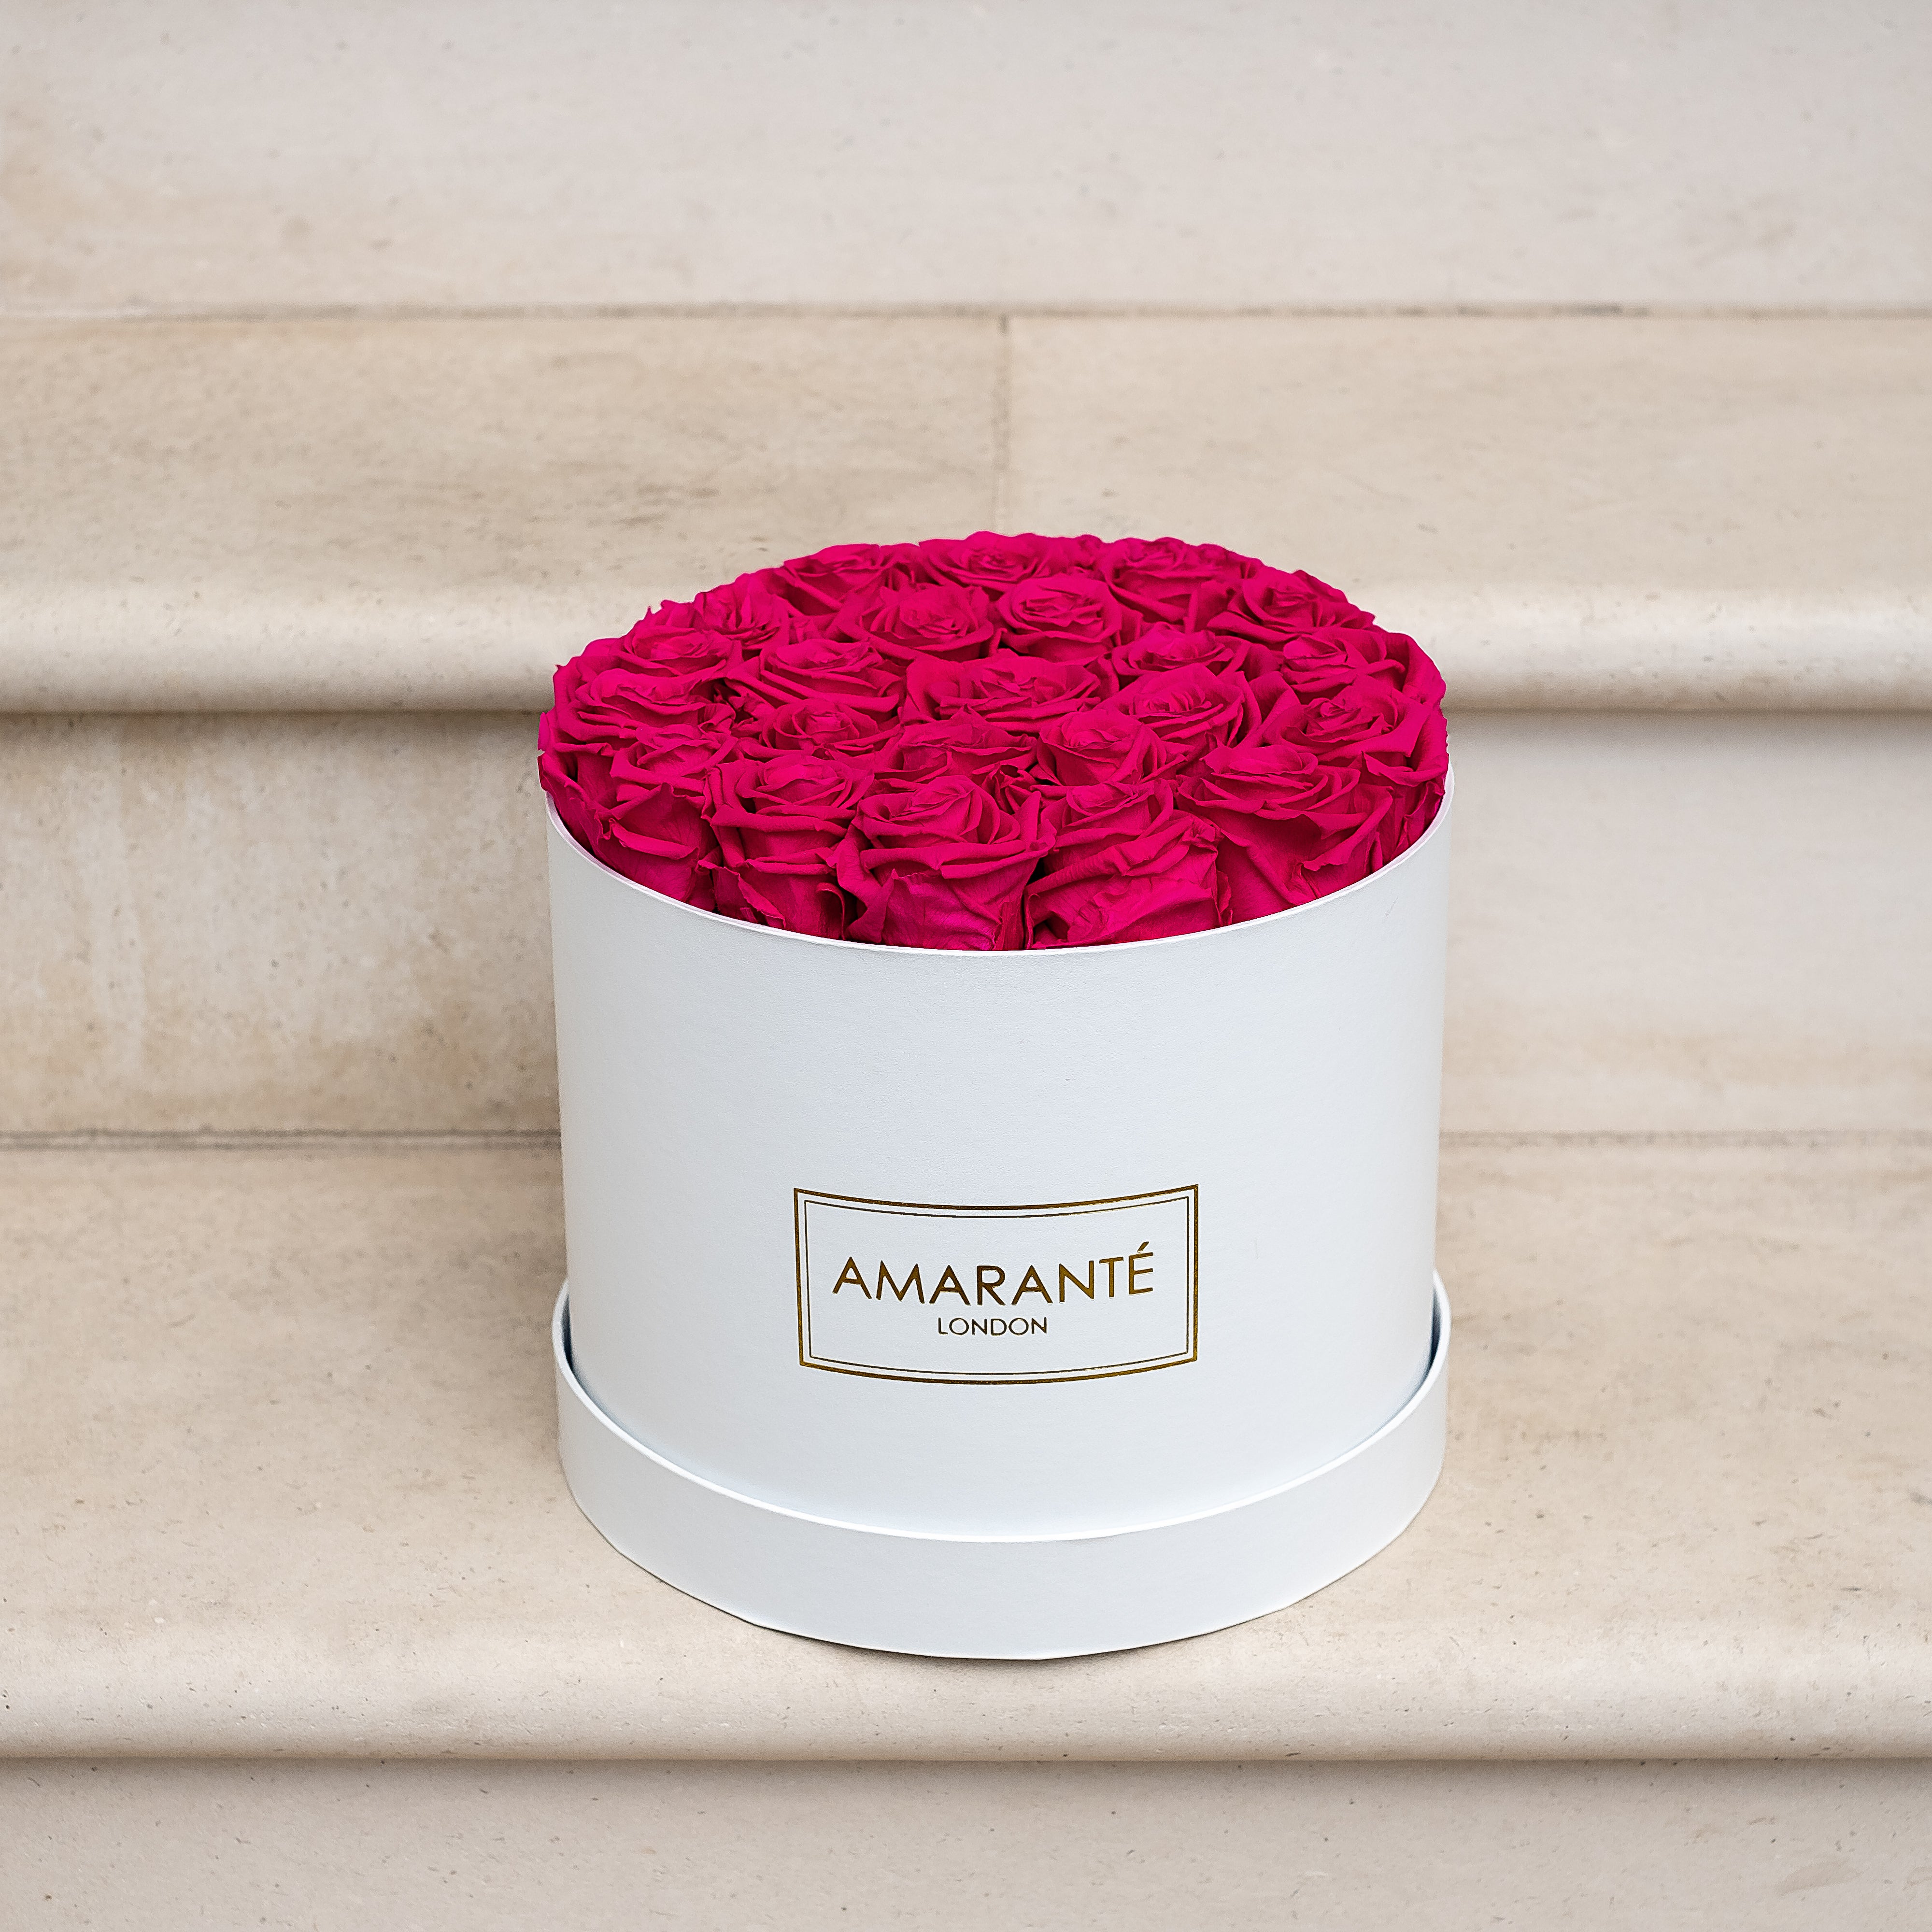 Order Roses Online and Plan the Delivery Date with Amaranté